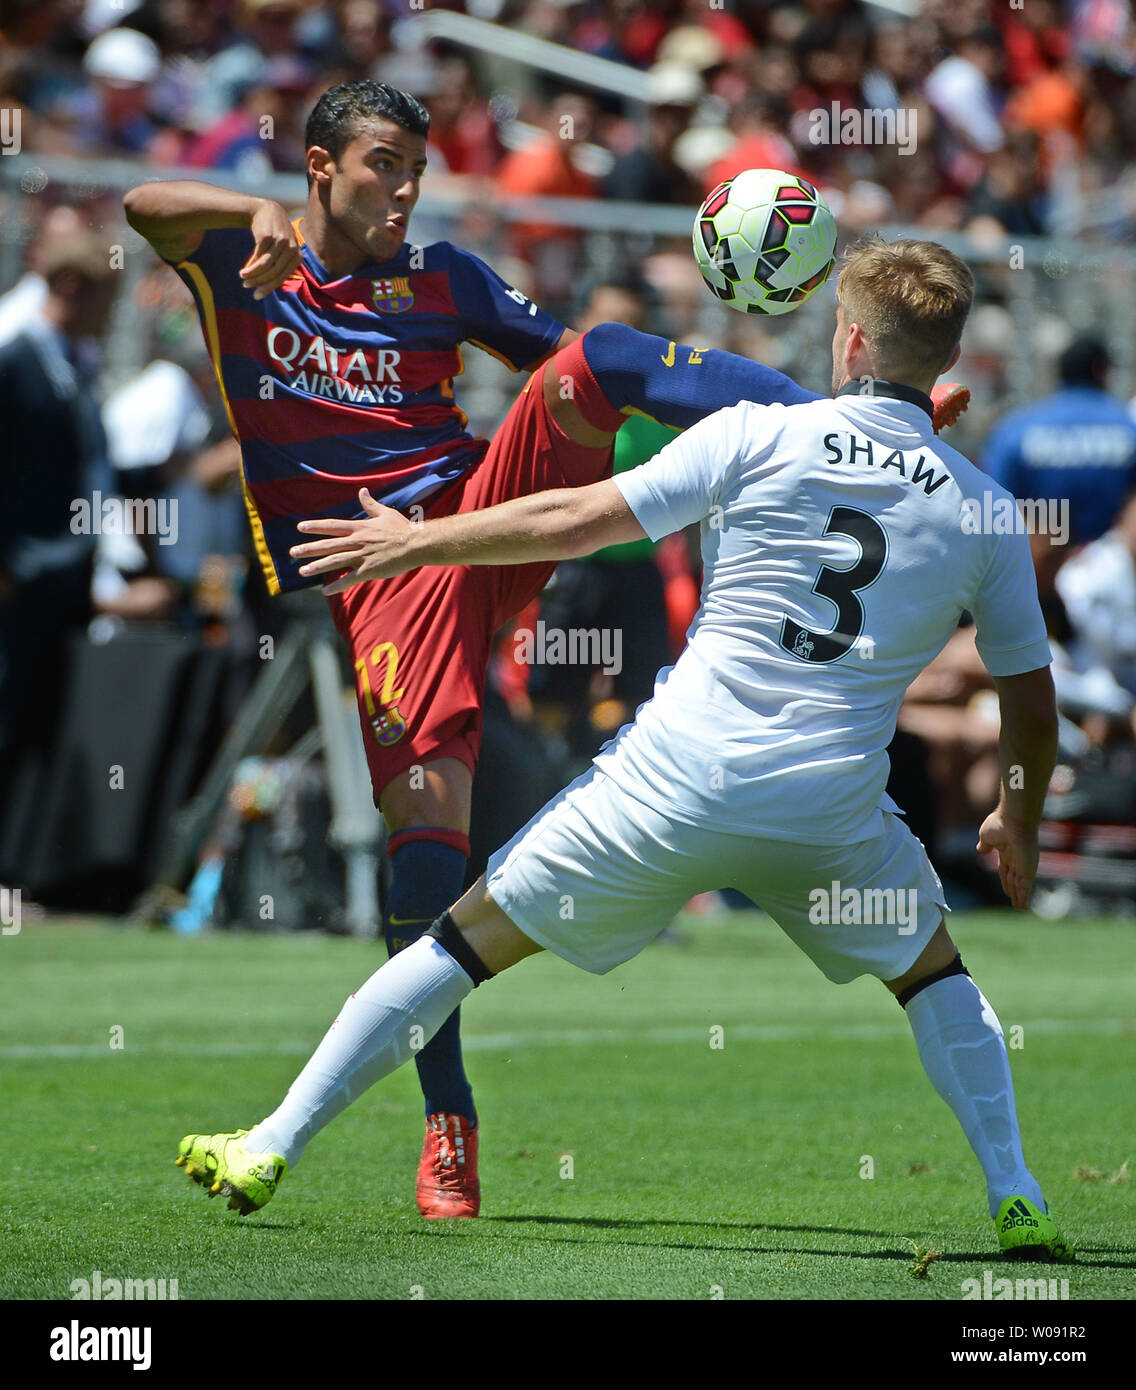 FC Barcelona's Rafinha (12) controls the ball in front of Manchester United's Luke Shaw in the second half in the 2015 International Champions Cup North America at Levi's Stadium in Santa Clara, California on July 25, 2015. Manchester defeated Barcelona 3-1.  Photo by Terry Schmitt/UPI Stock Photo